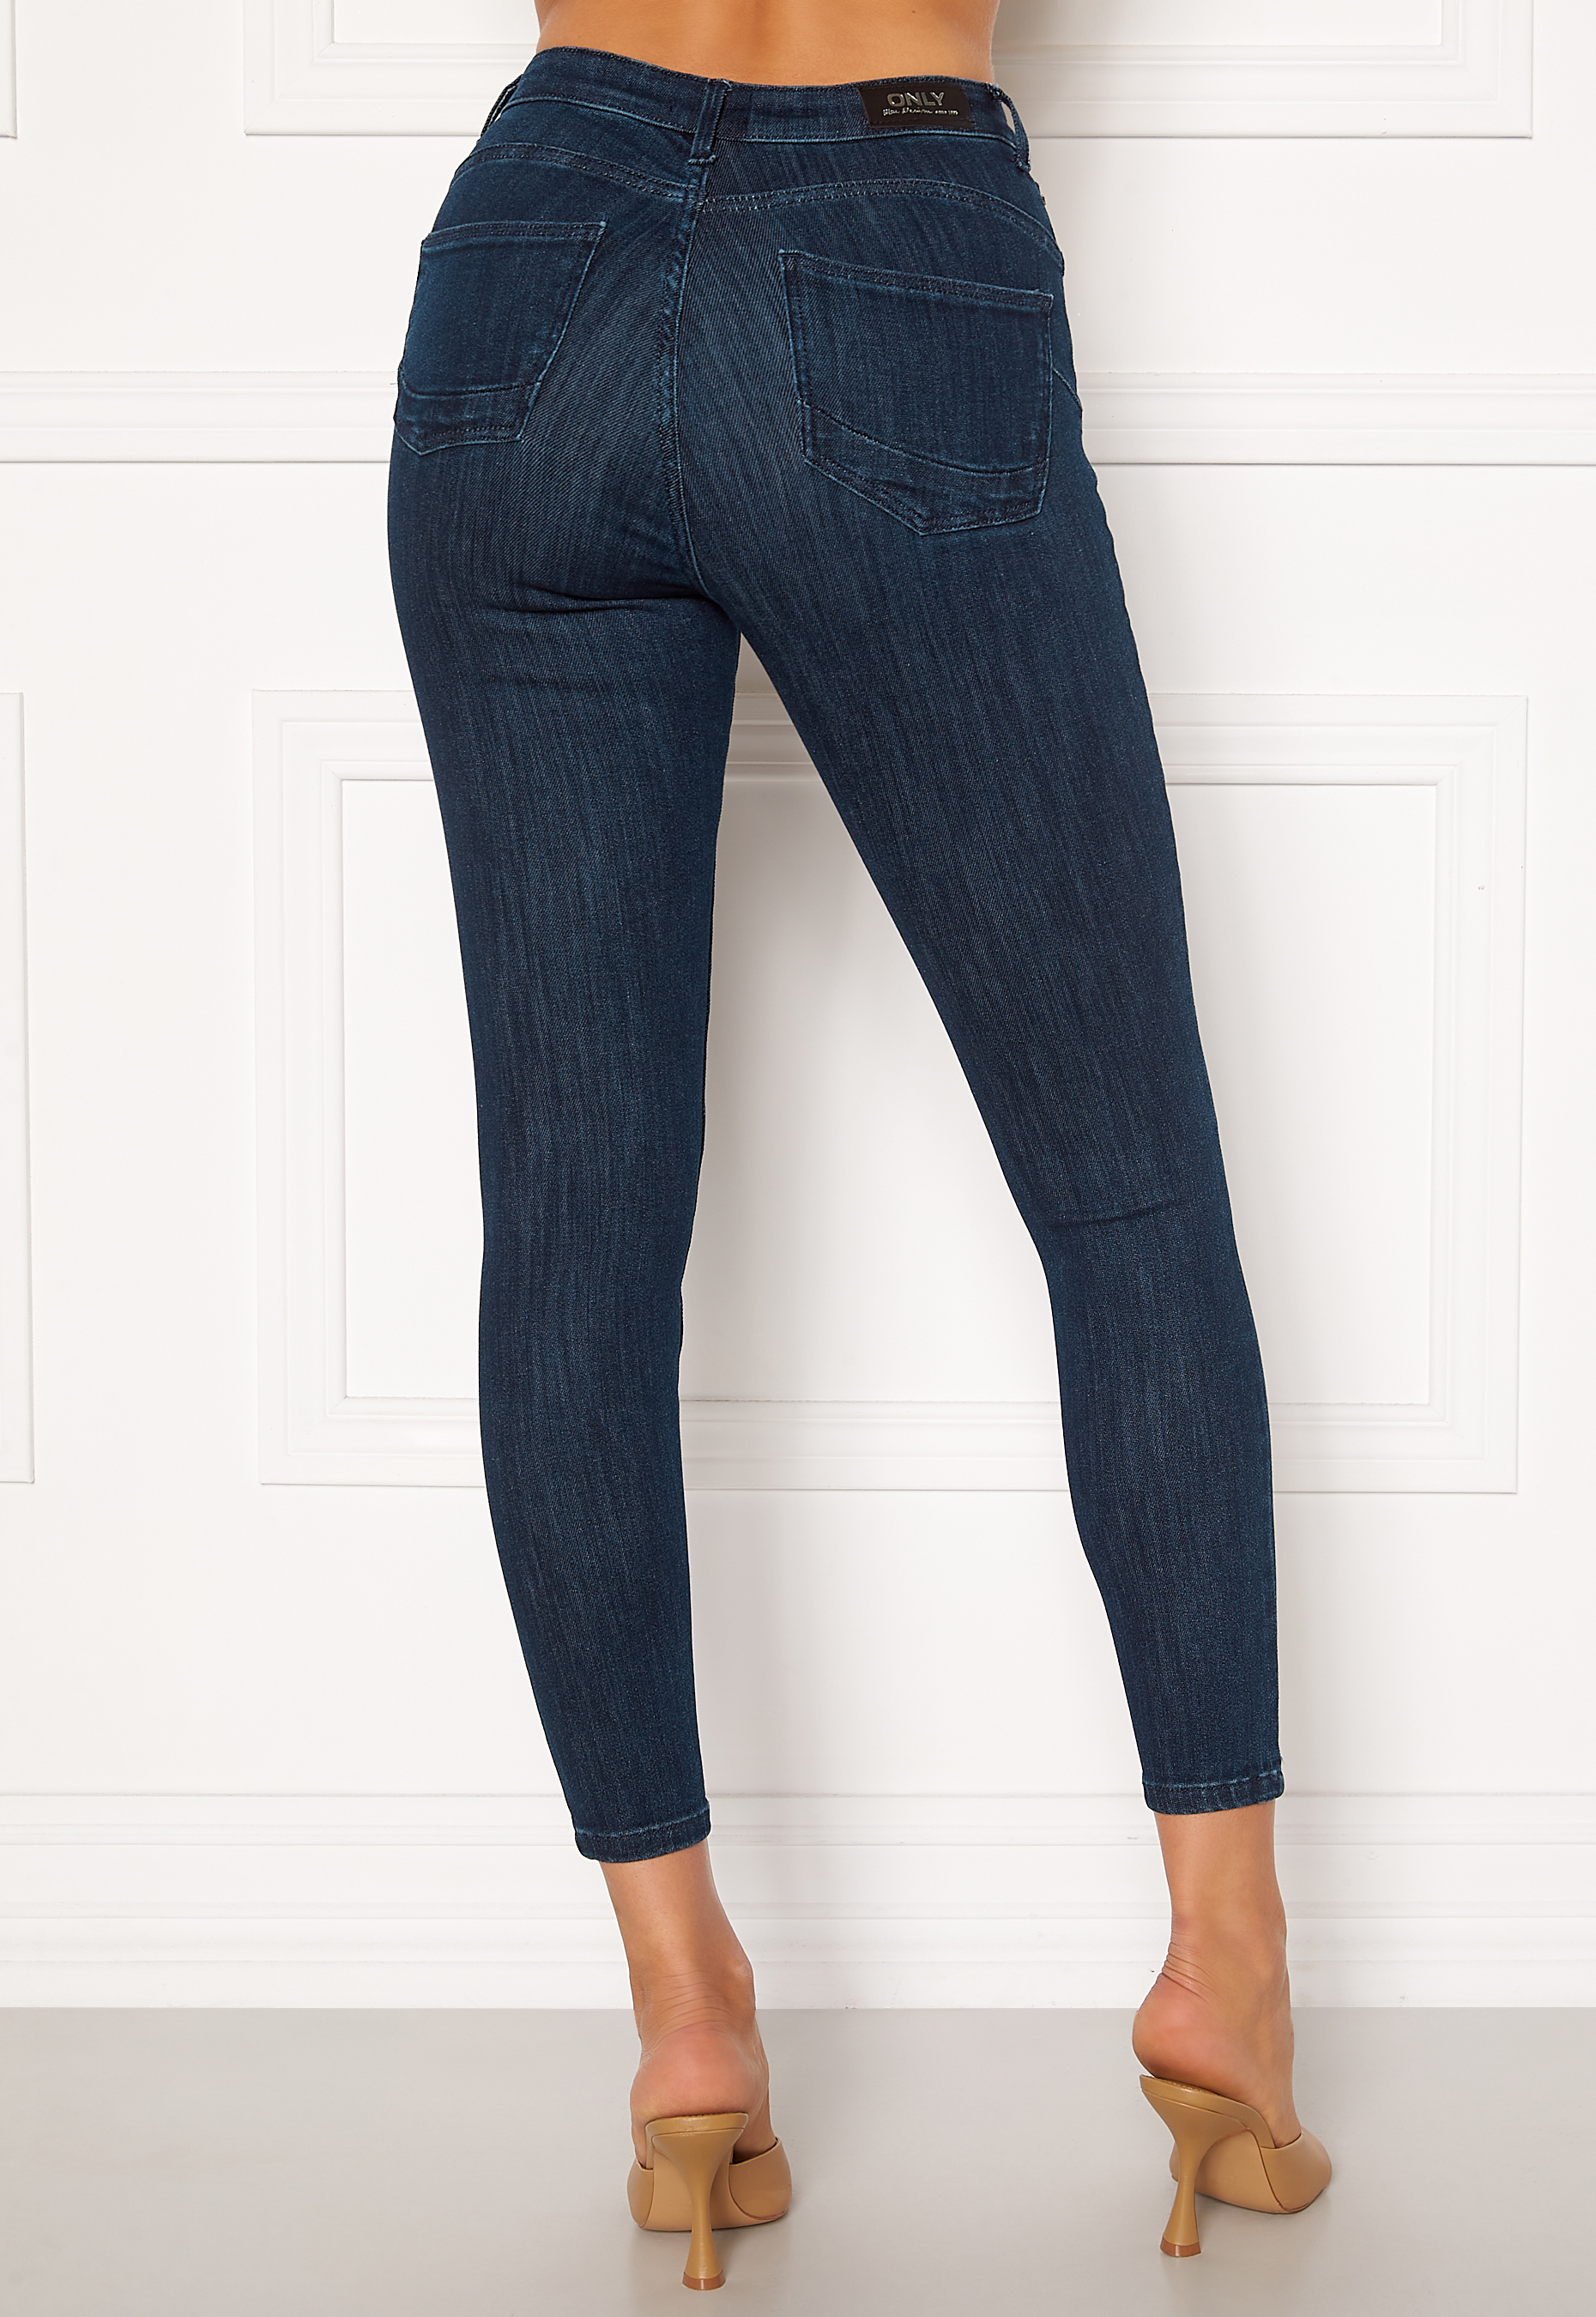 Inhibere At accelerere Excel ONLY Power Life Mid Push Up Jeans Dark Blue Denim - Bubbleroom